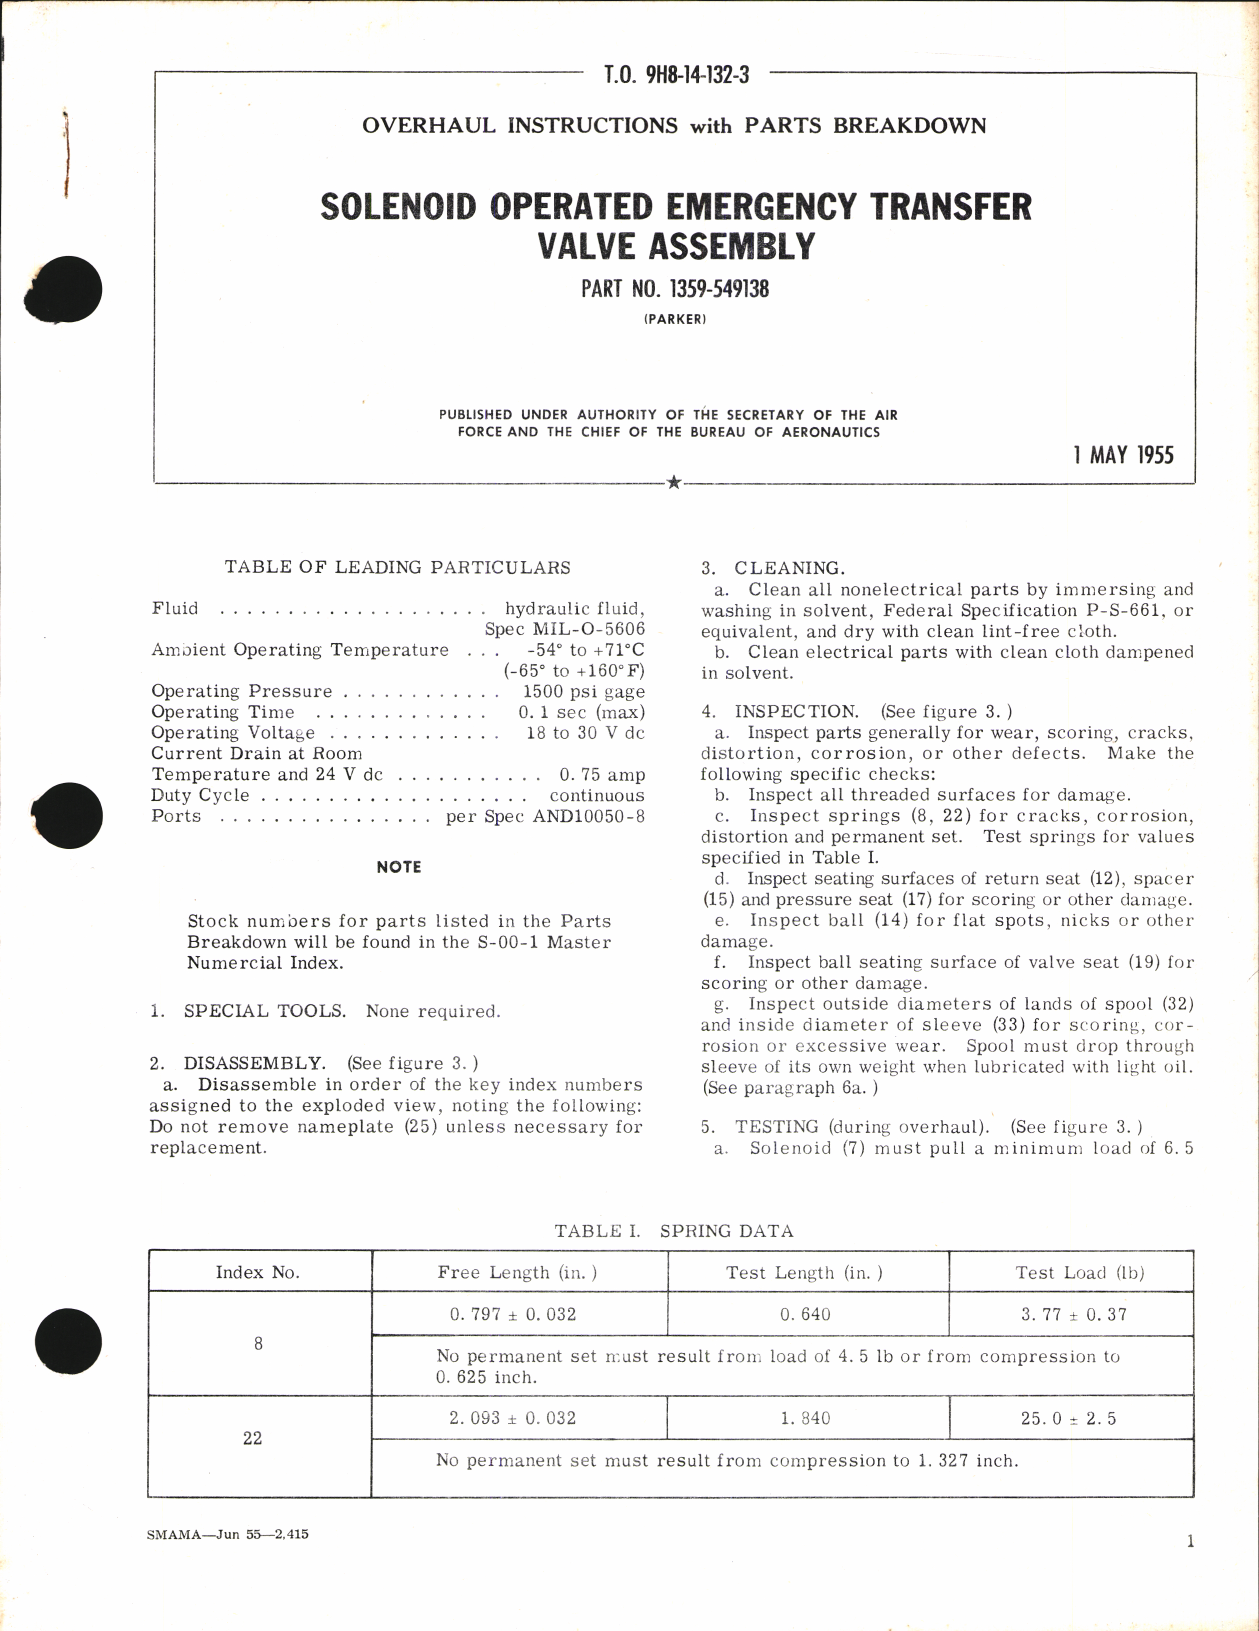 Sample page 1 from AirCorps Library document: Overhaul Instructions with Parts Breakdown for Solenoid Operated Emergency Transfer Valve Assembly Part No. 1359-549138